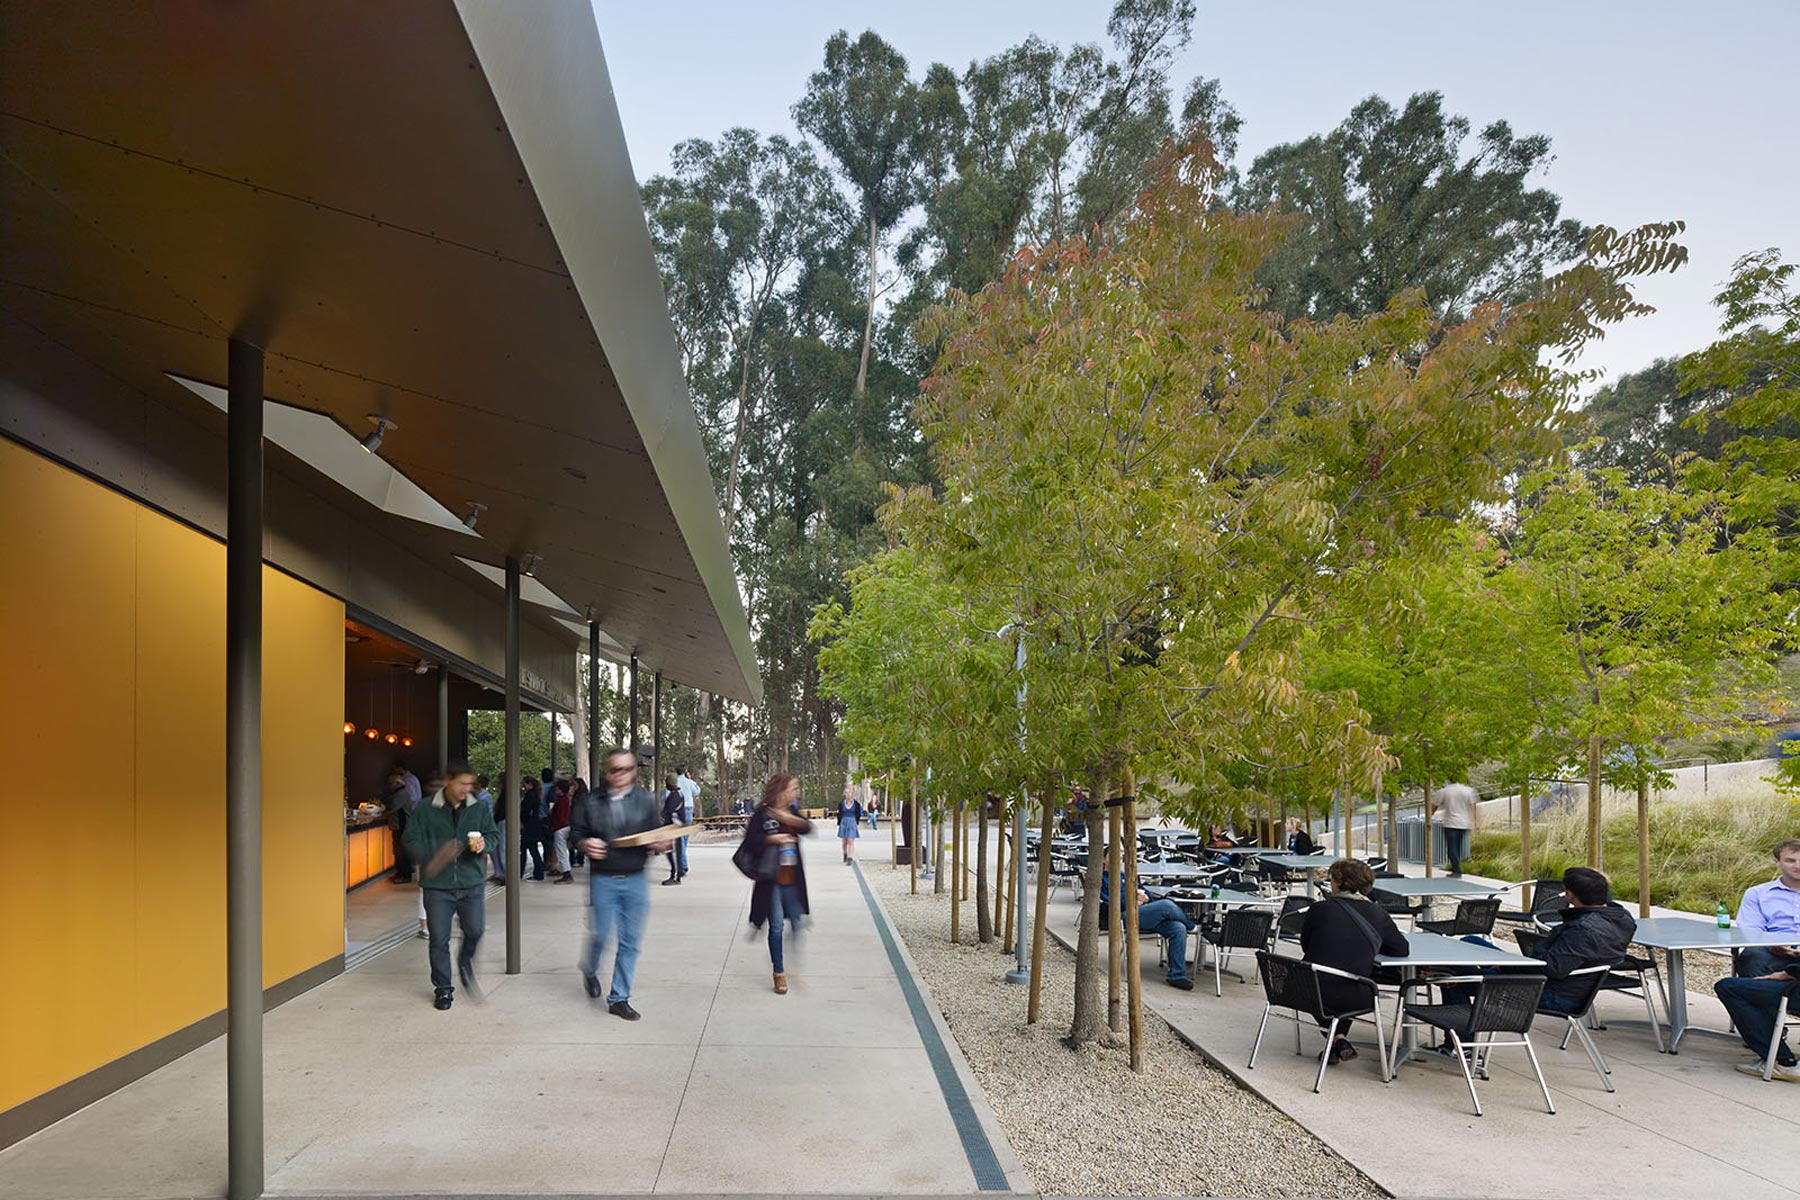 The Sharon Simpson Center at the California Shakespeare Theater, located in the San Francisco Bay Area, encourages environmental stewardship and sustainable goals by utilizing a living roof and being integrated into the natural landscape of the site.